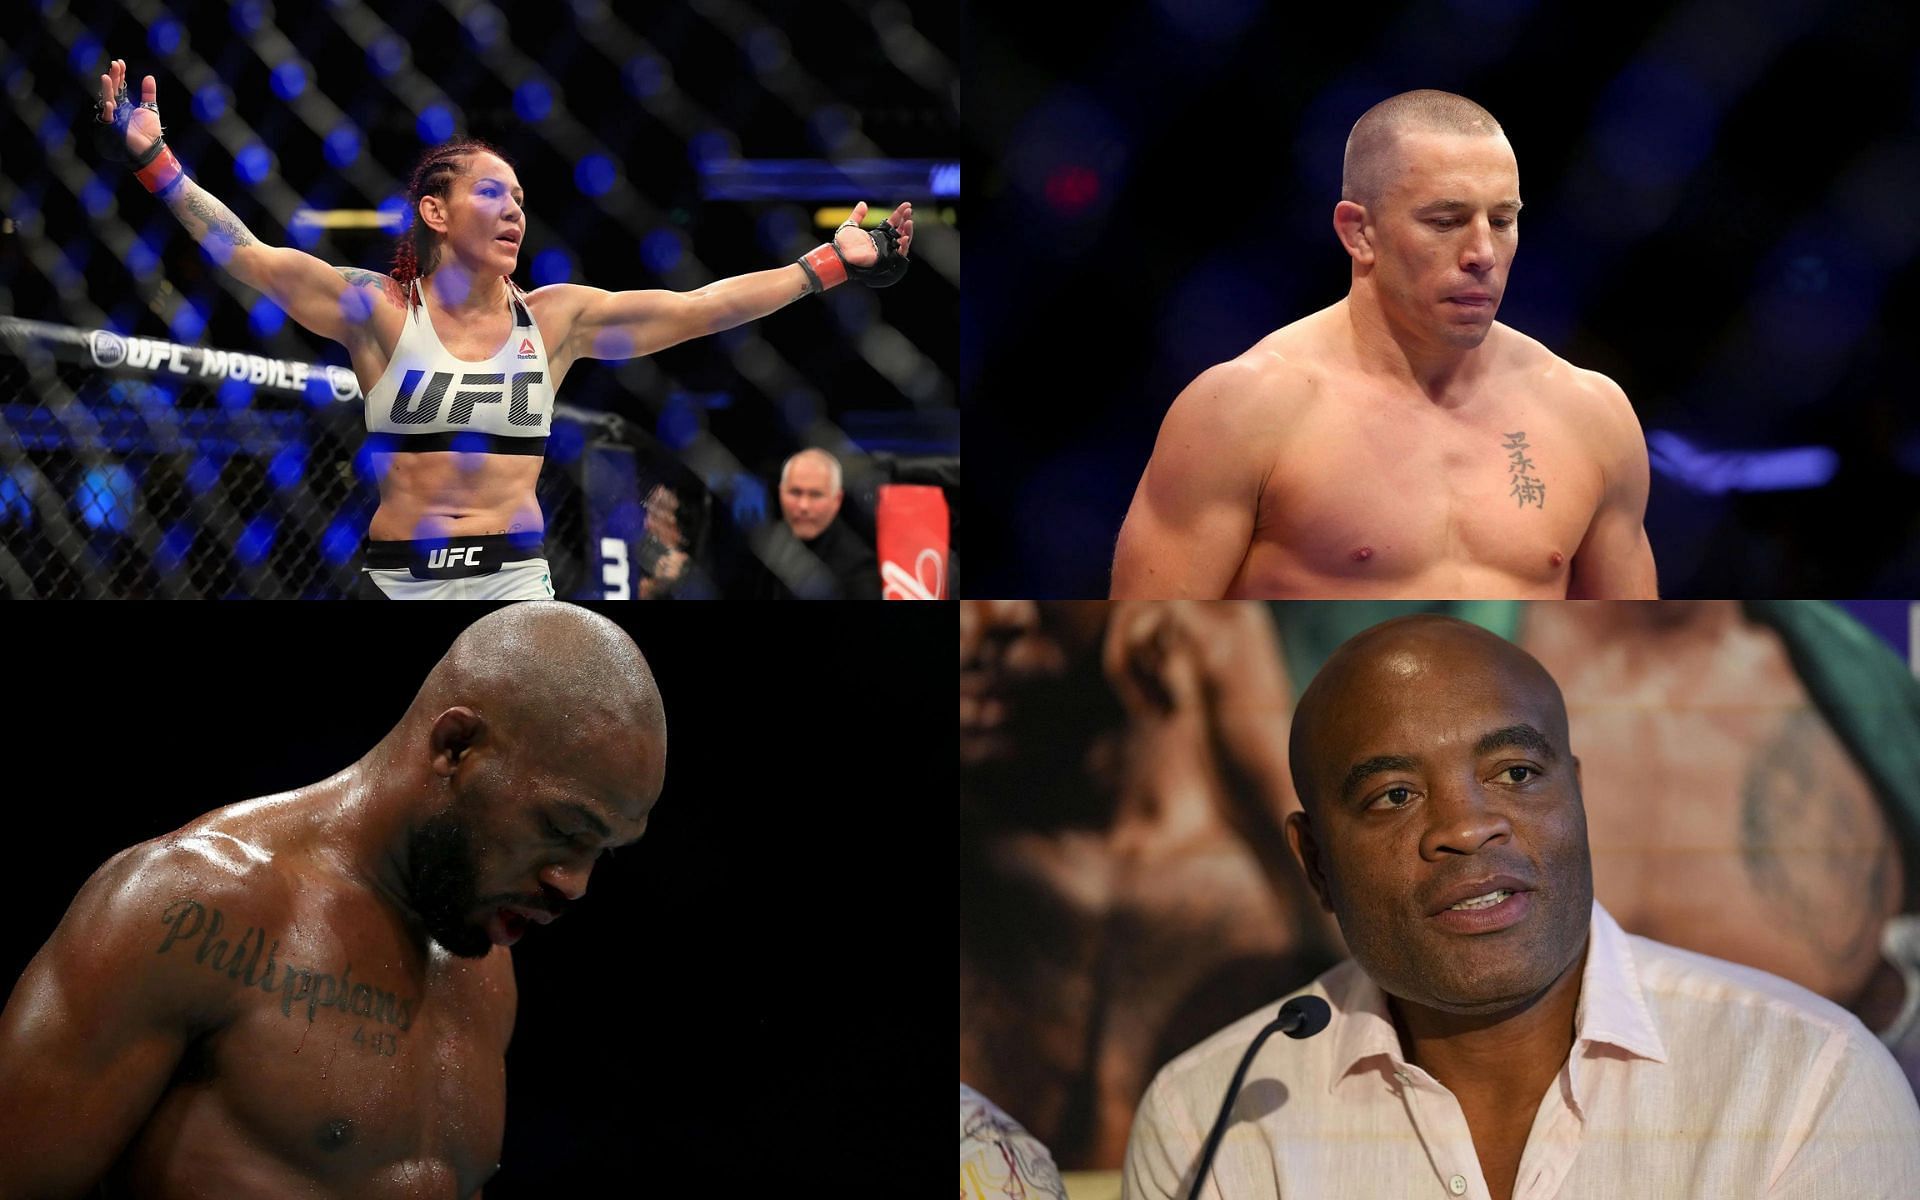 Cris Cyborg (Top Left), Jon Jones (Bottom Left), Anderson Silva (Bottom Right), and Georges St-Pierre (Top Right) (Images courtesy of Getty)